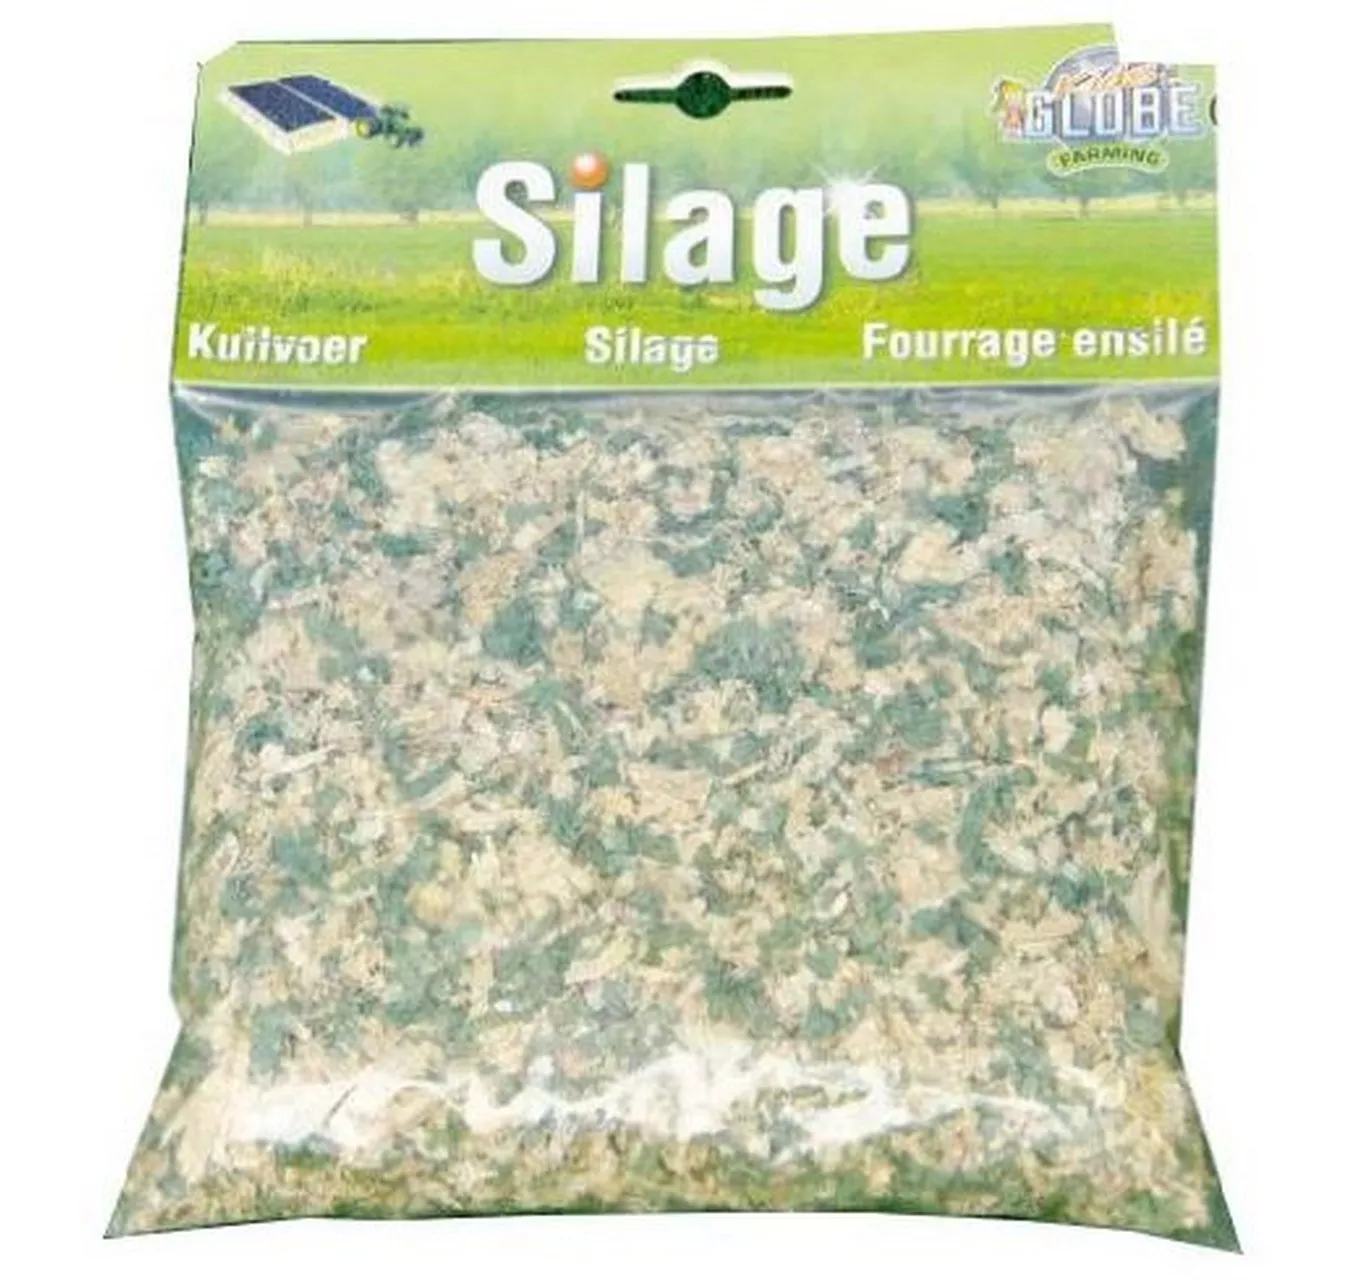 Bag of Silage 100g